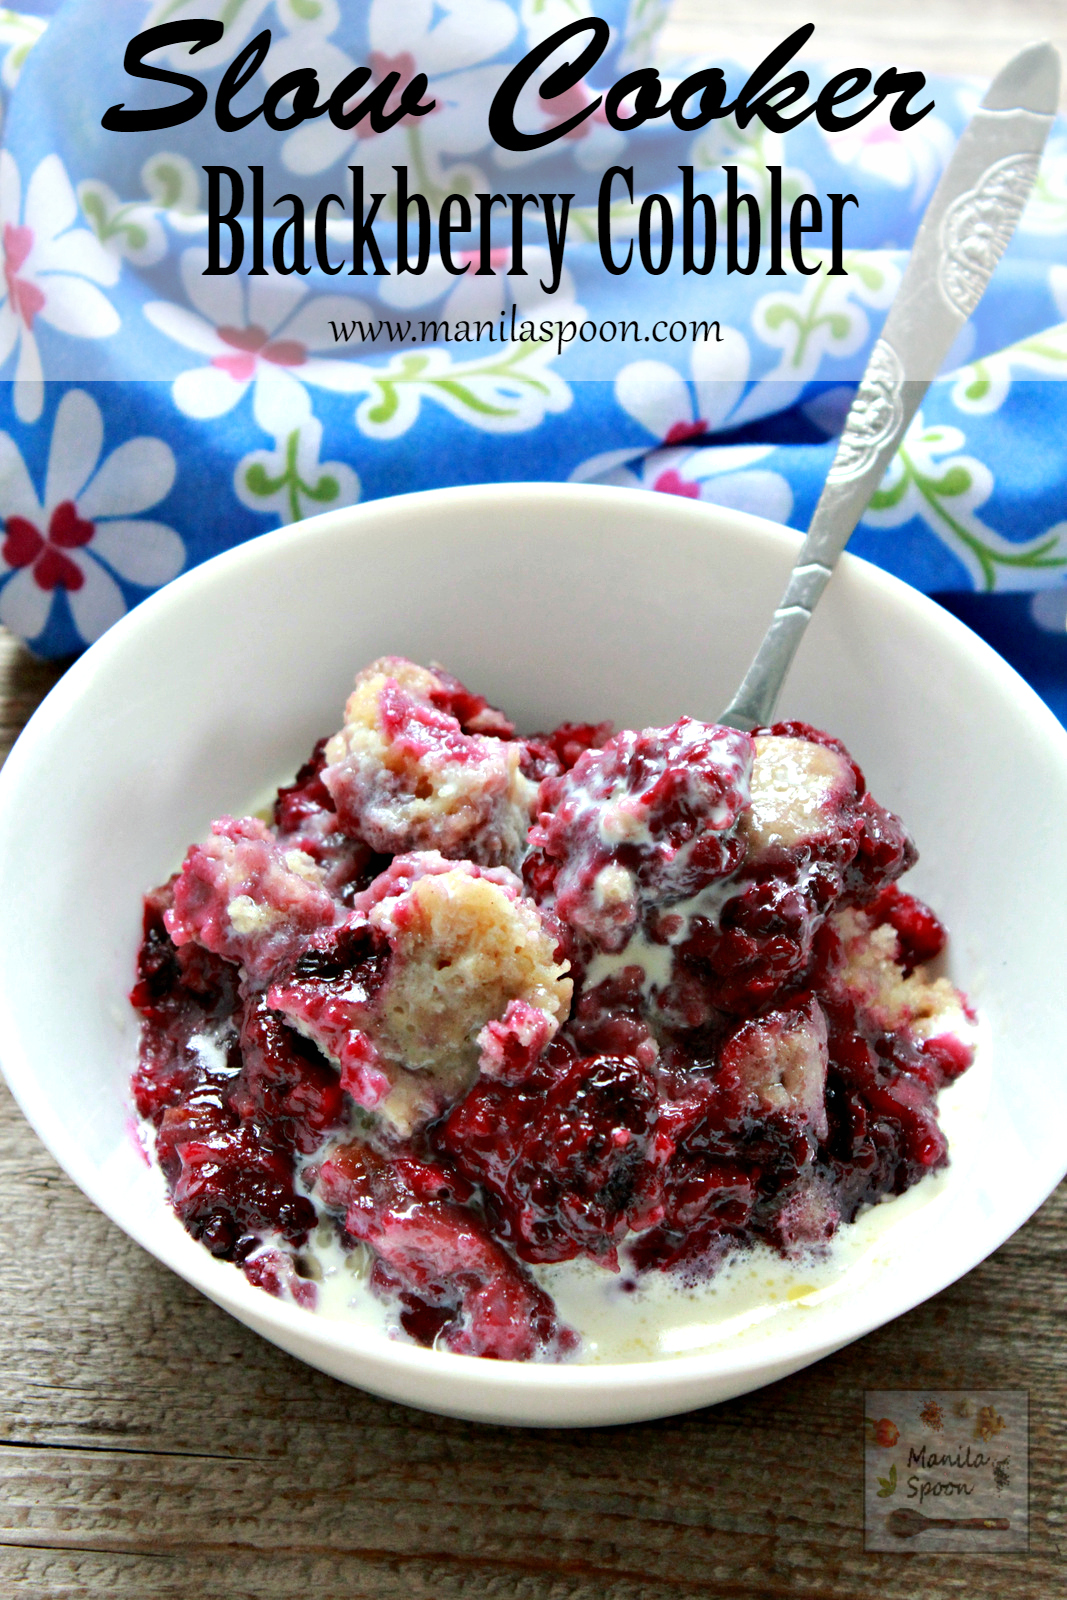 This is so incredibly delicious and incredibly easy to make! Best of all, no baking is required, as your slow cooker does all the work. Serve hot with cream or ice cream - heavenly! Slow cooker blackberry shoe